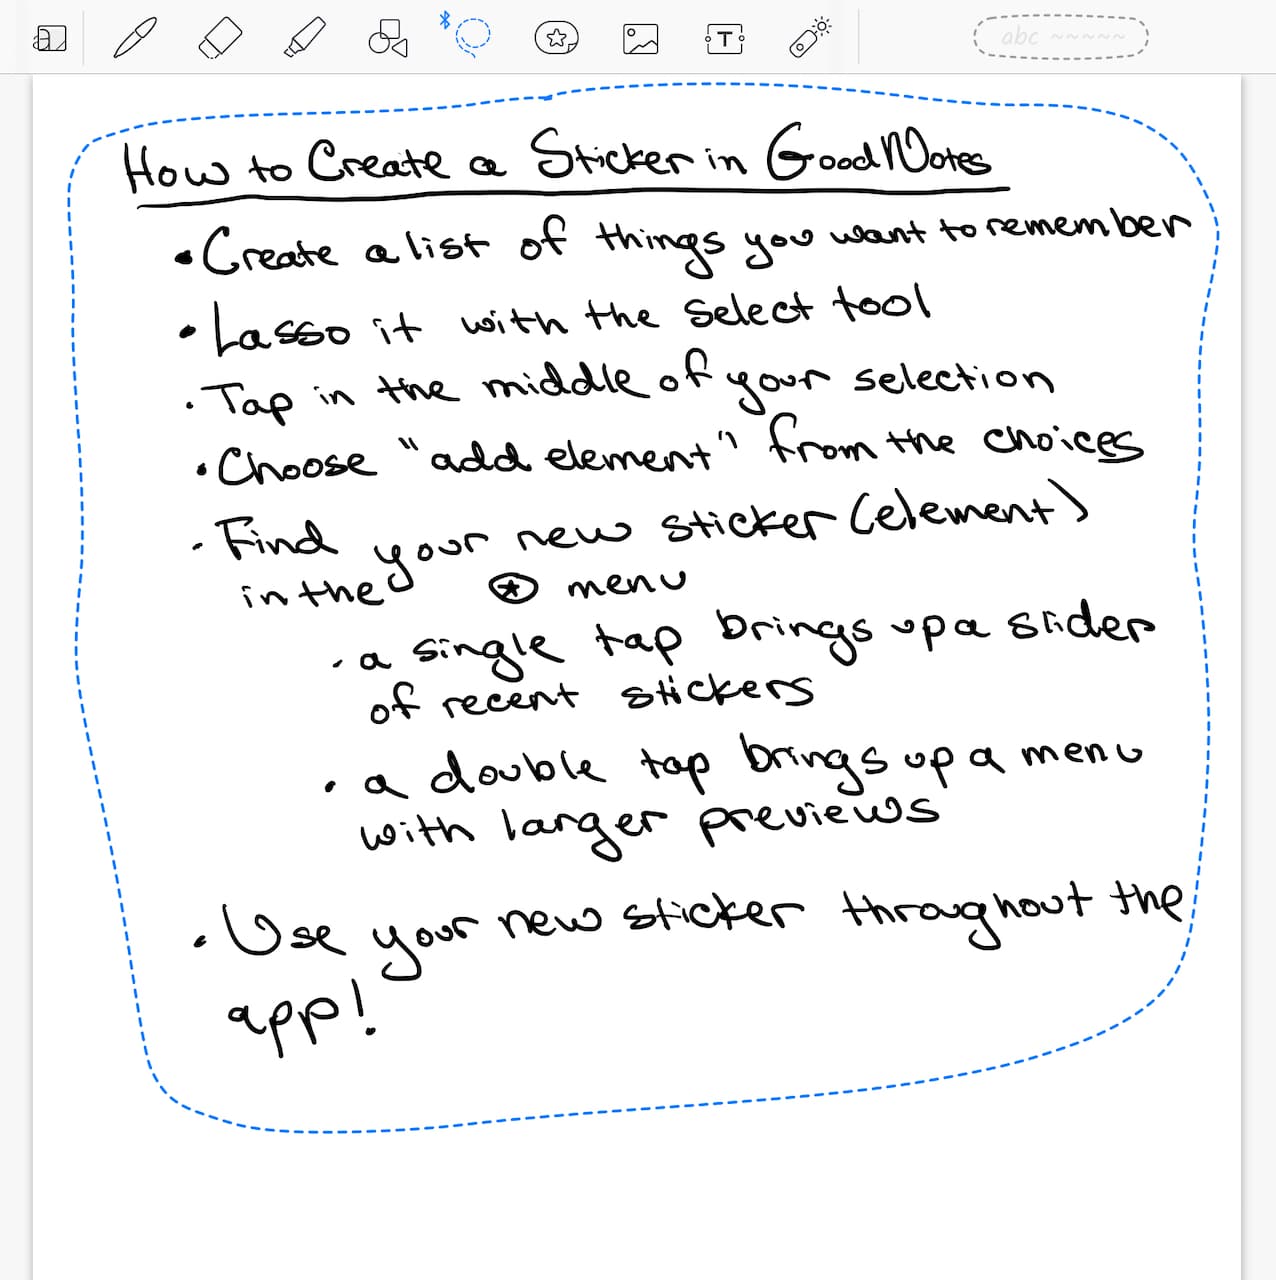 Image with directions on how to create a GoodNotes sticker